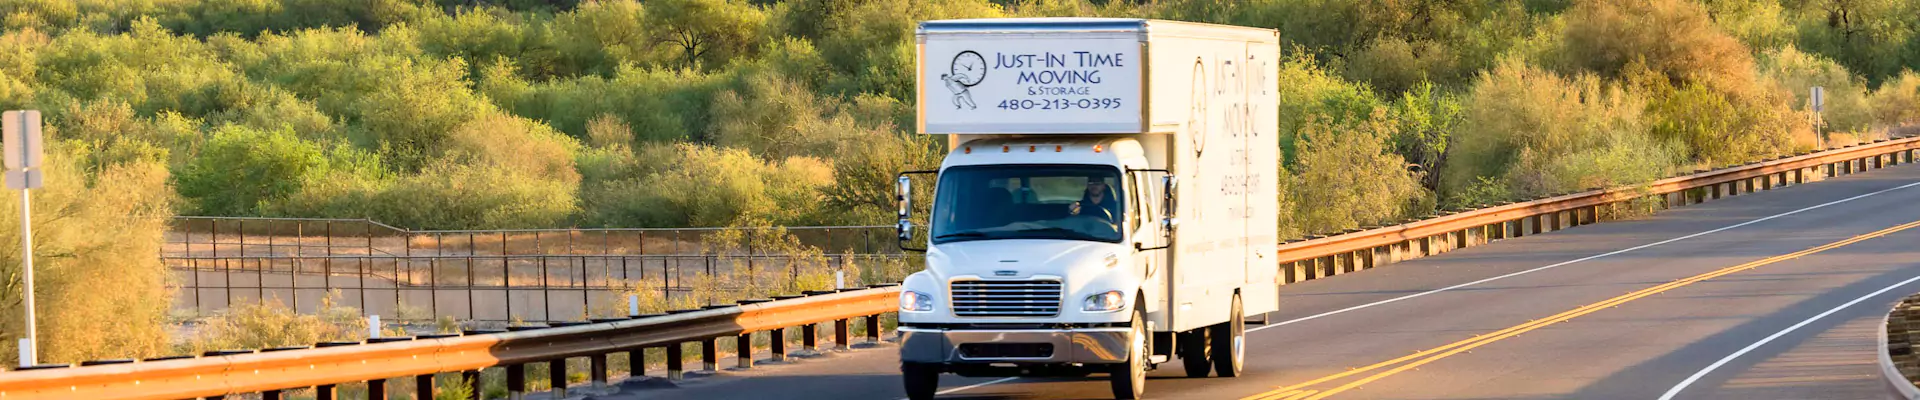 Get Your Free Moving Quote Today! - Just-in Time Moving and Storage